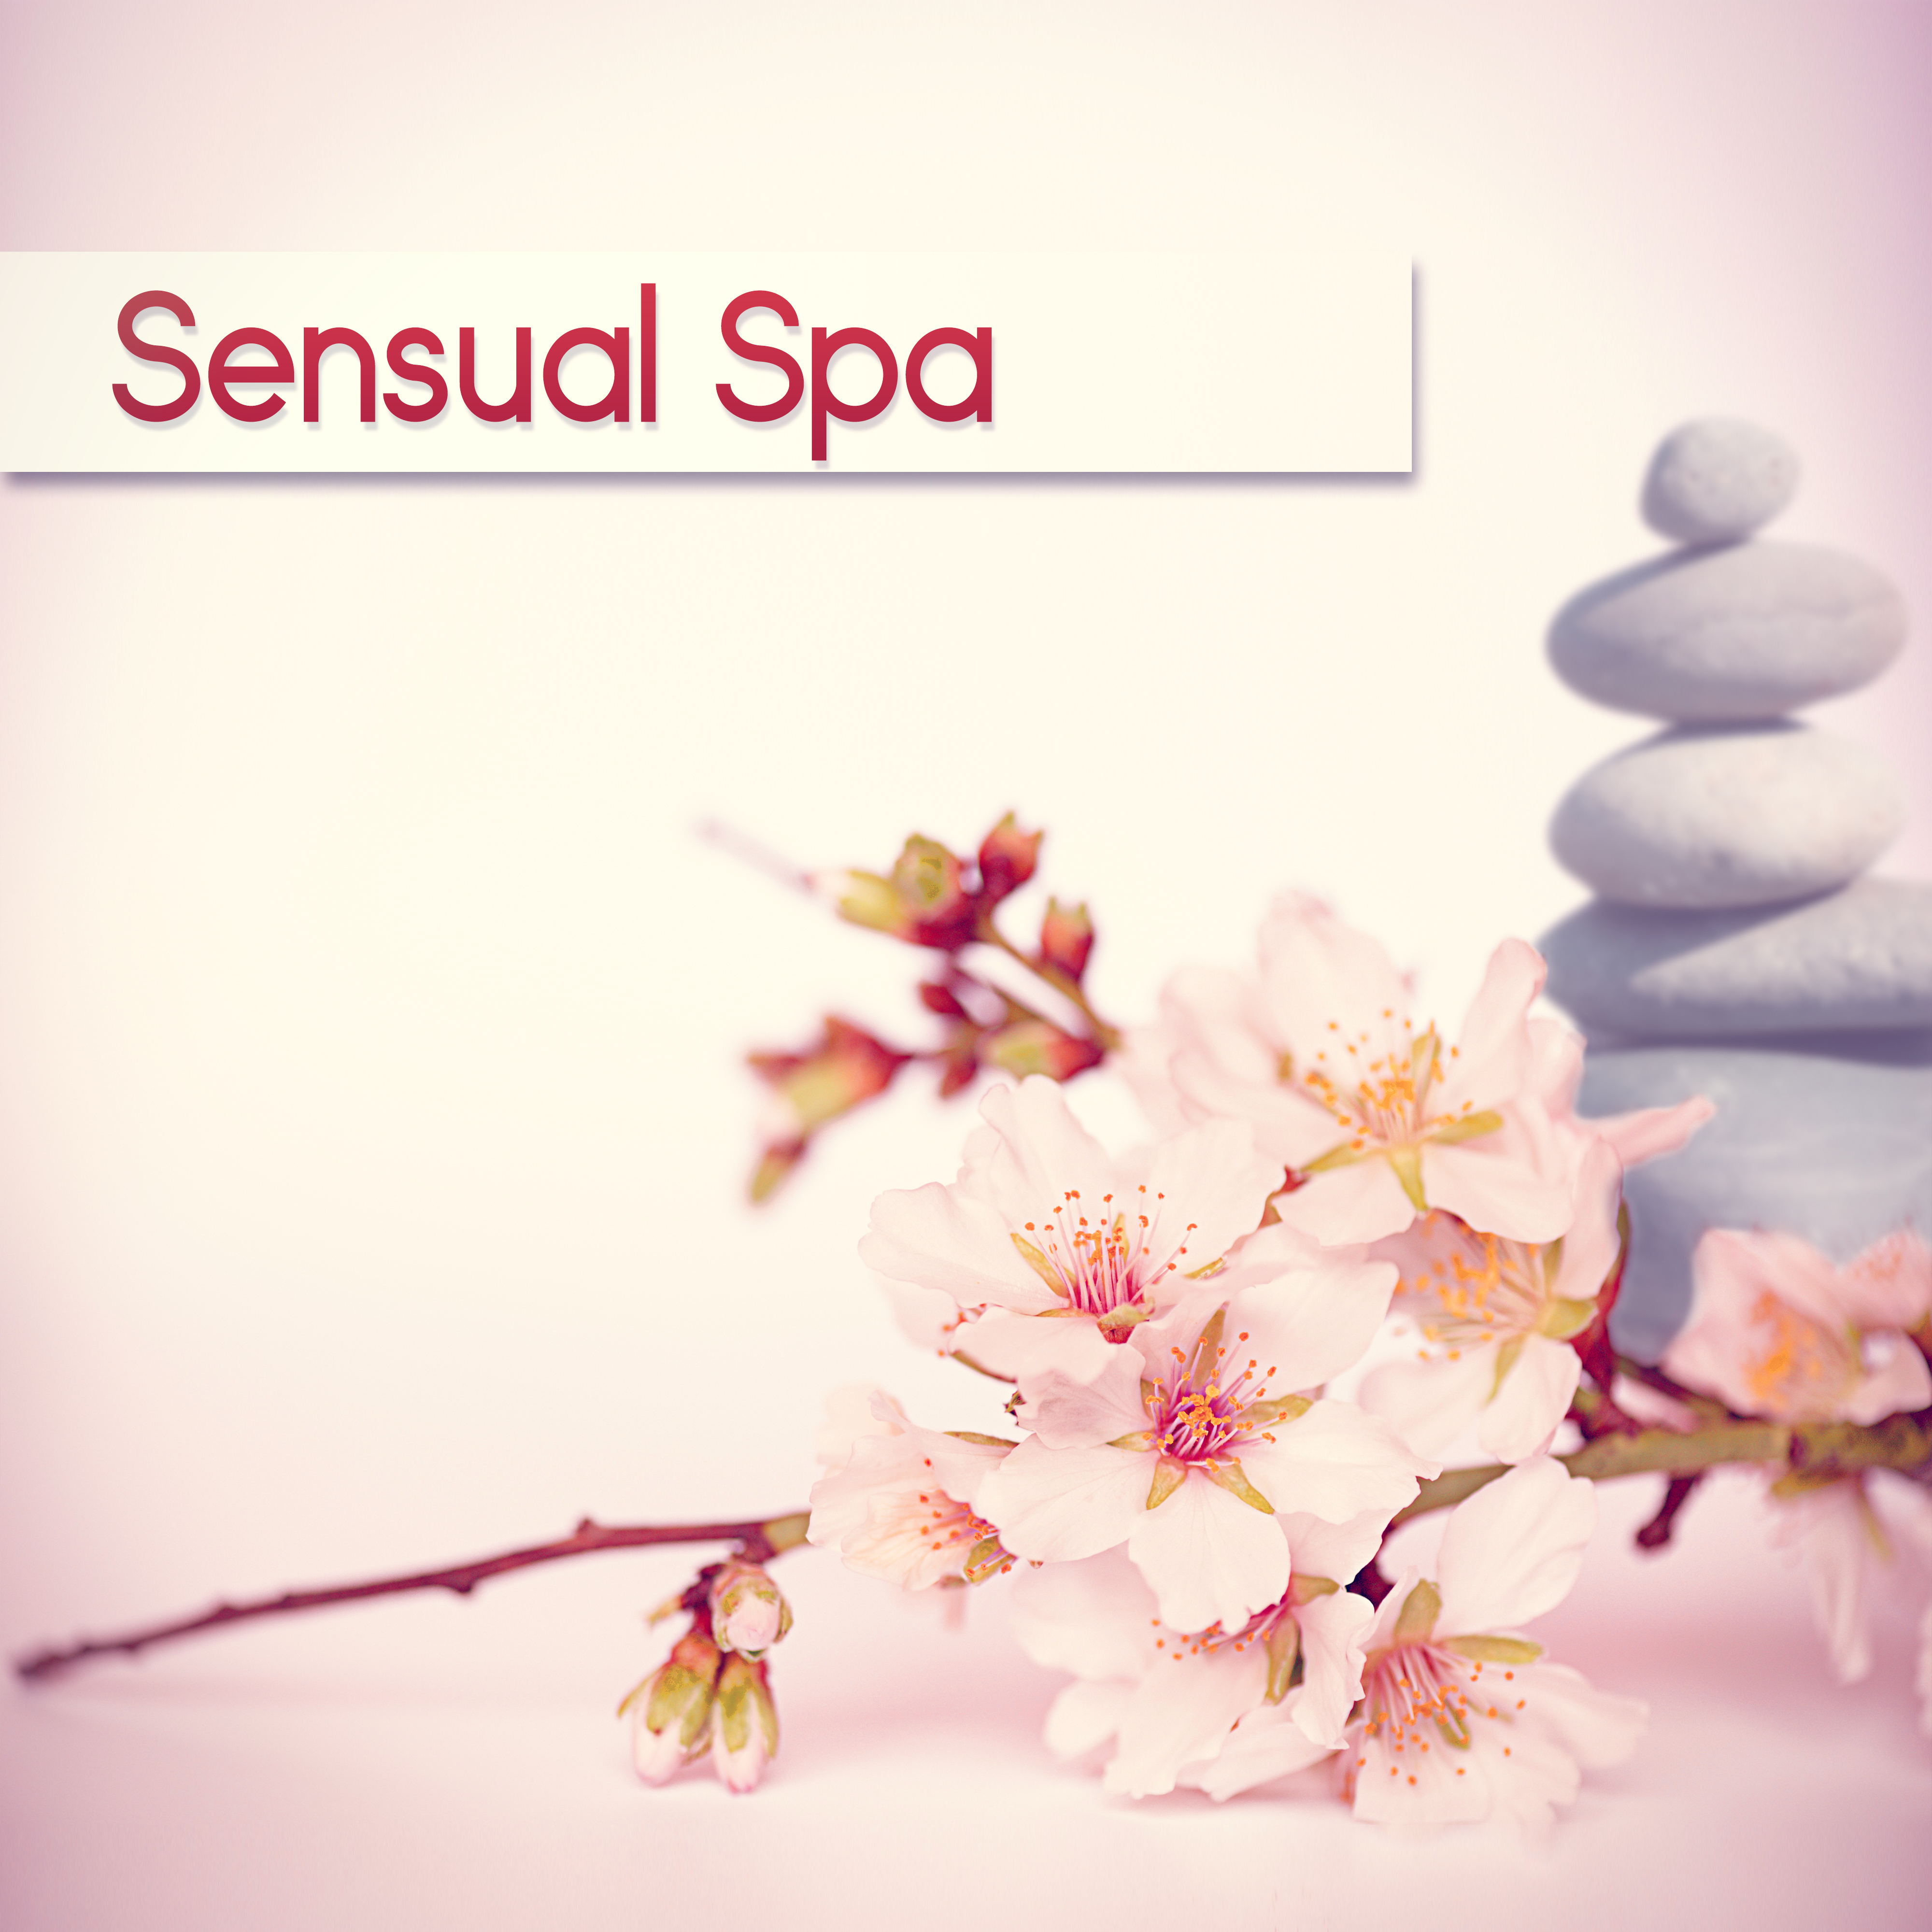 Sensual Spa - Sensual Massage, Nature Music for Healing Through Sound and Touch, Music for Aromatherapy, Reiki Healing, Soothing Music, Lounge Music